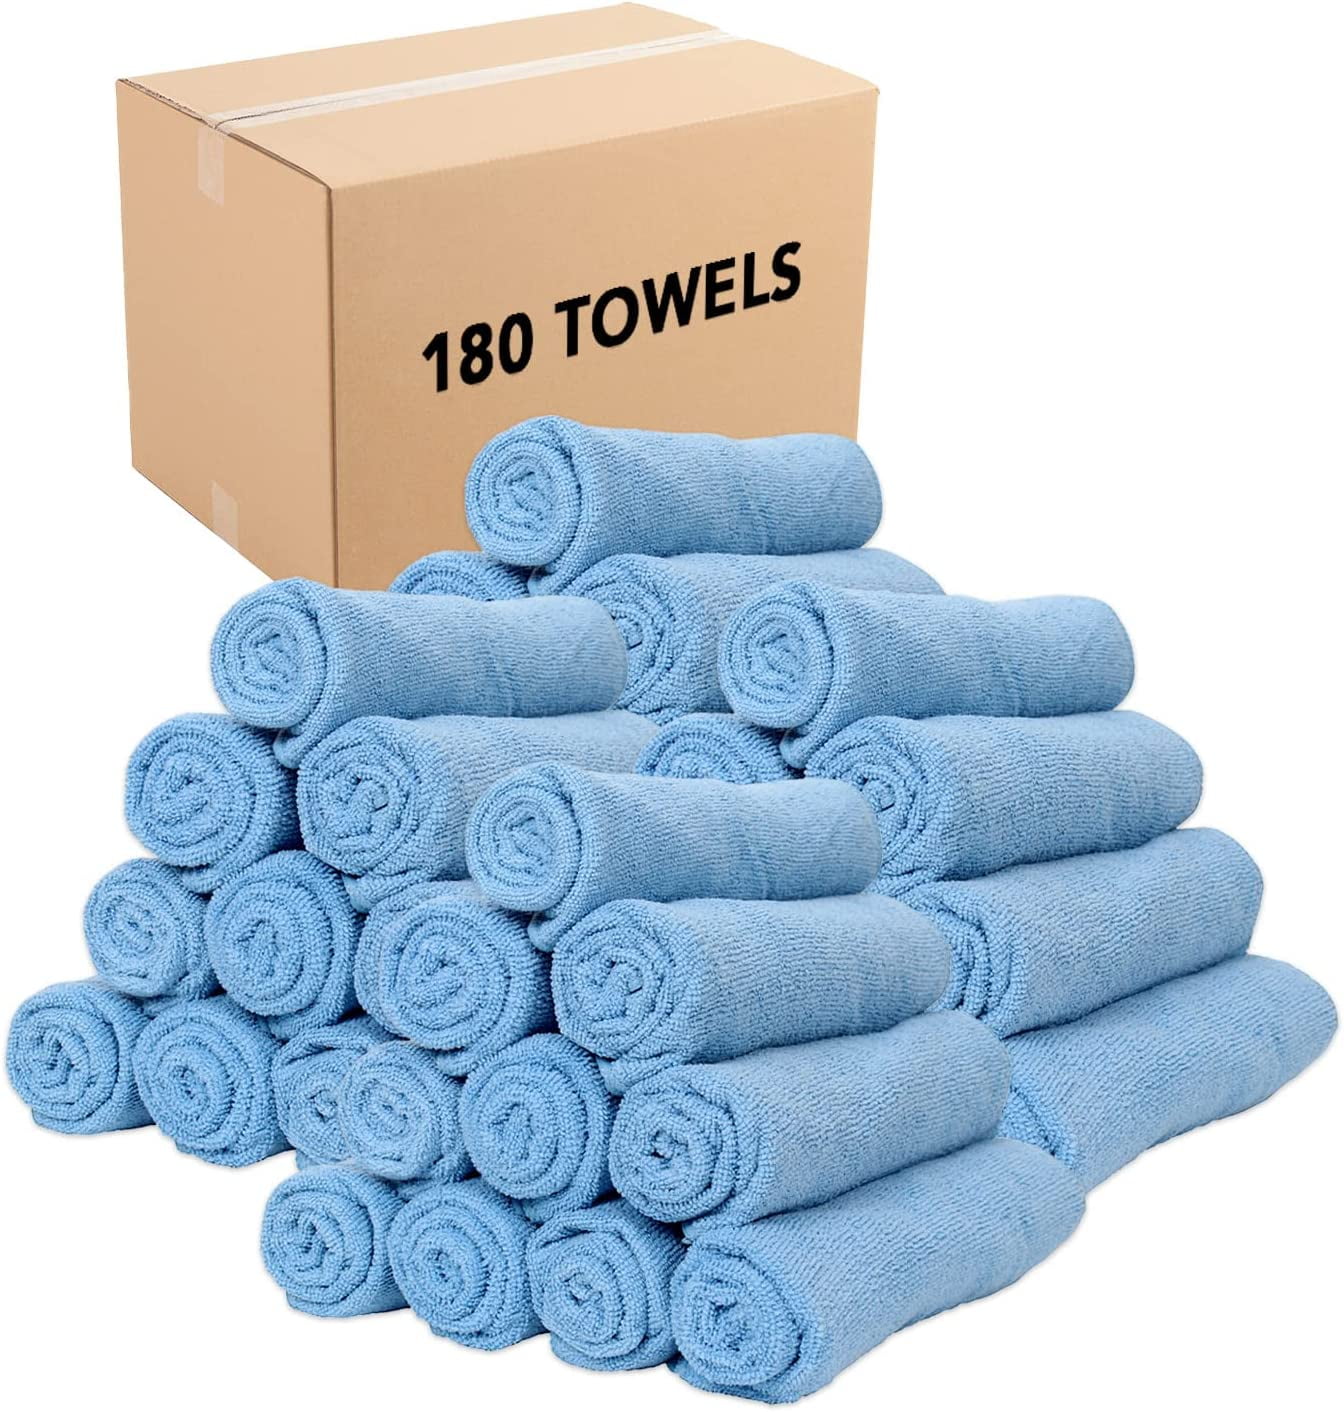 Microfiber Gym Towel - (Case of 180) Bulk Soft Lightweight Quick Dry Hotel  Quality Hand Towels, 300 GSM, Sweat Absorbent, Perfect for Workout, Yoga,  Spa, Bathroom, 16 x 27 in, Green 